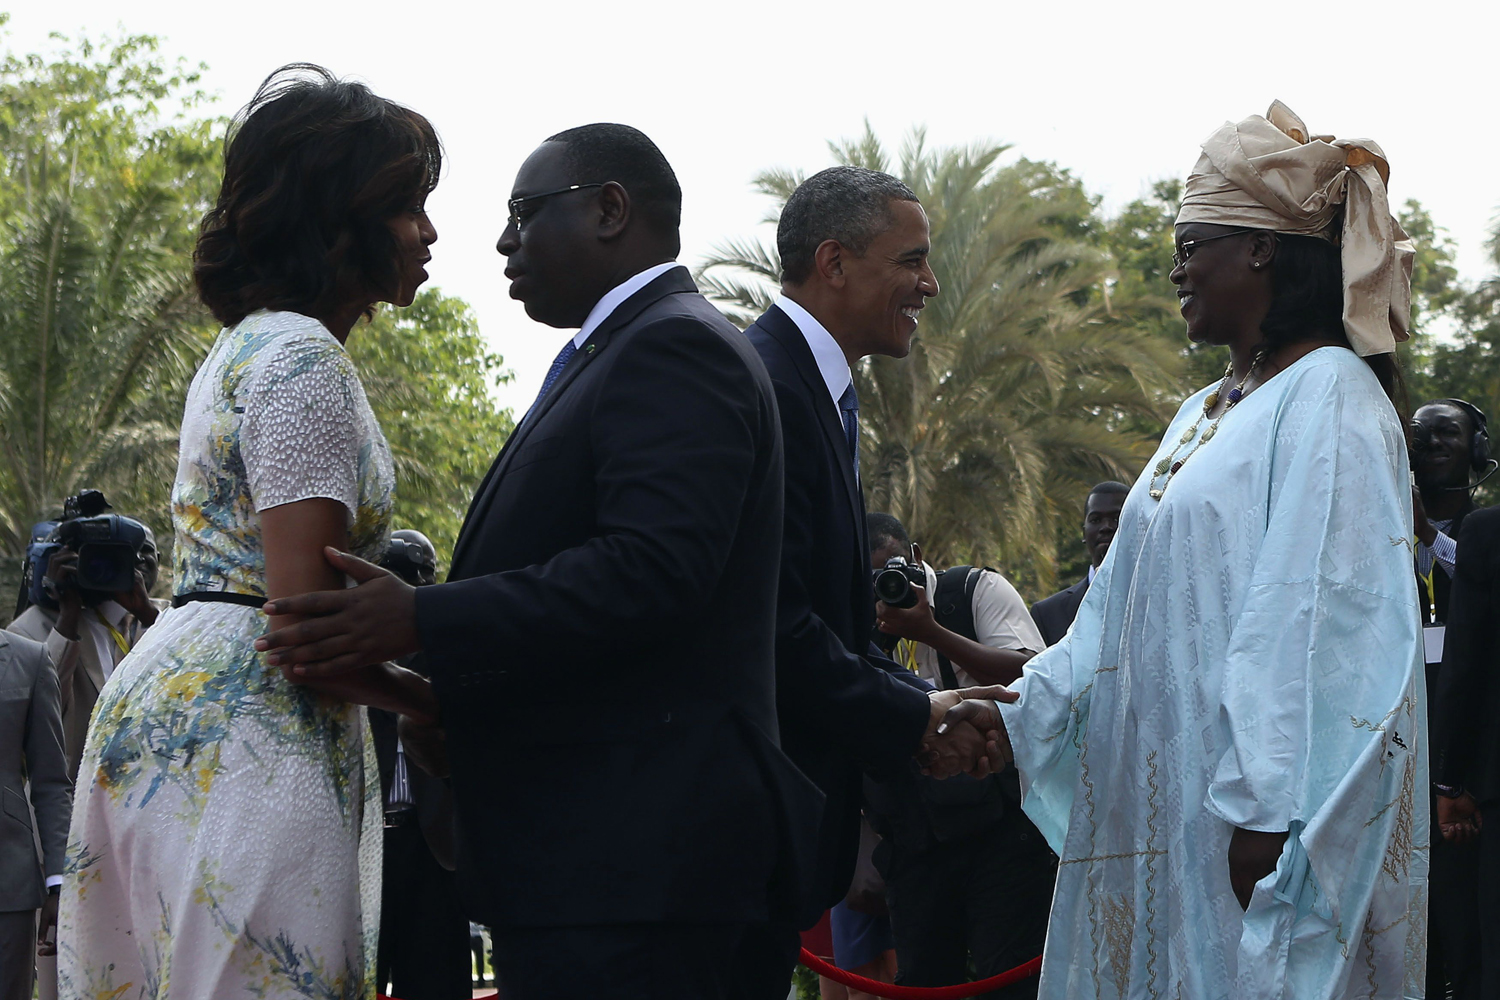 U.S. President Obama and first lady Michelle are greeted by Senegal President Sall and his wife Mariame at Presidential Palace in Dakar